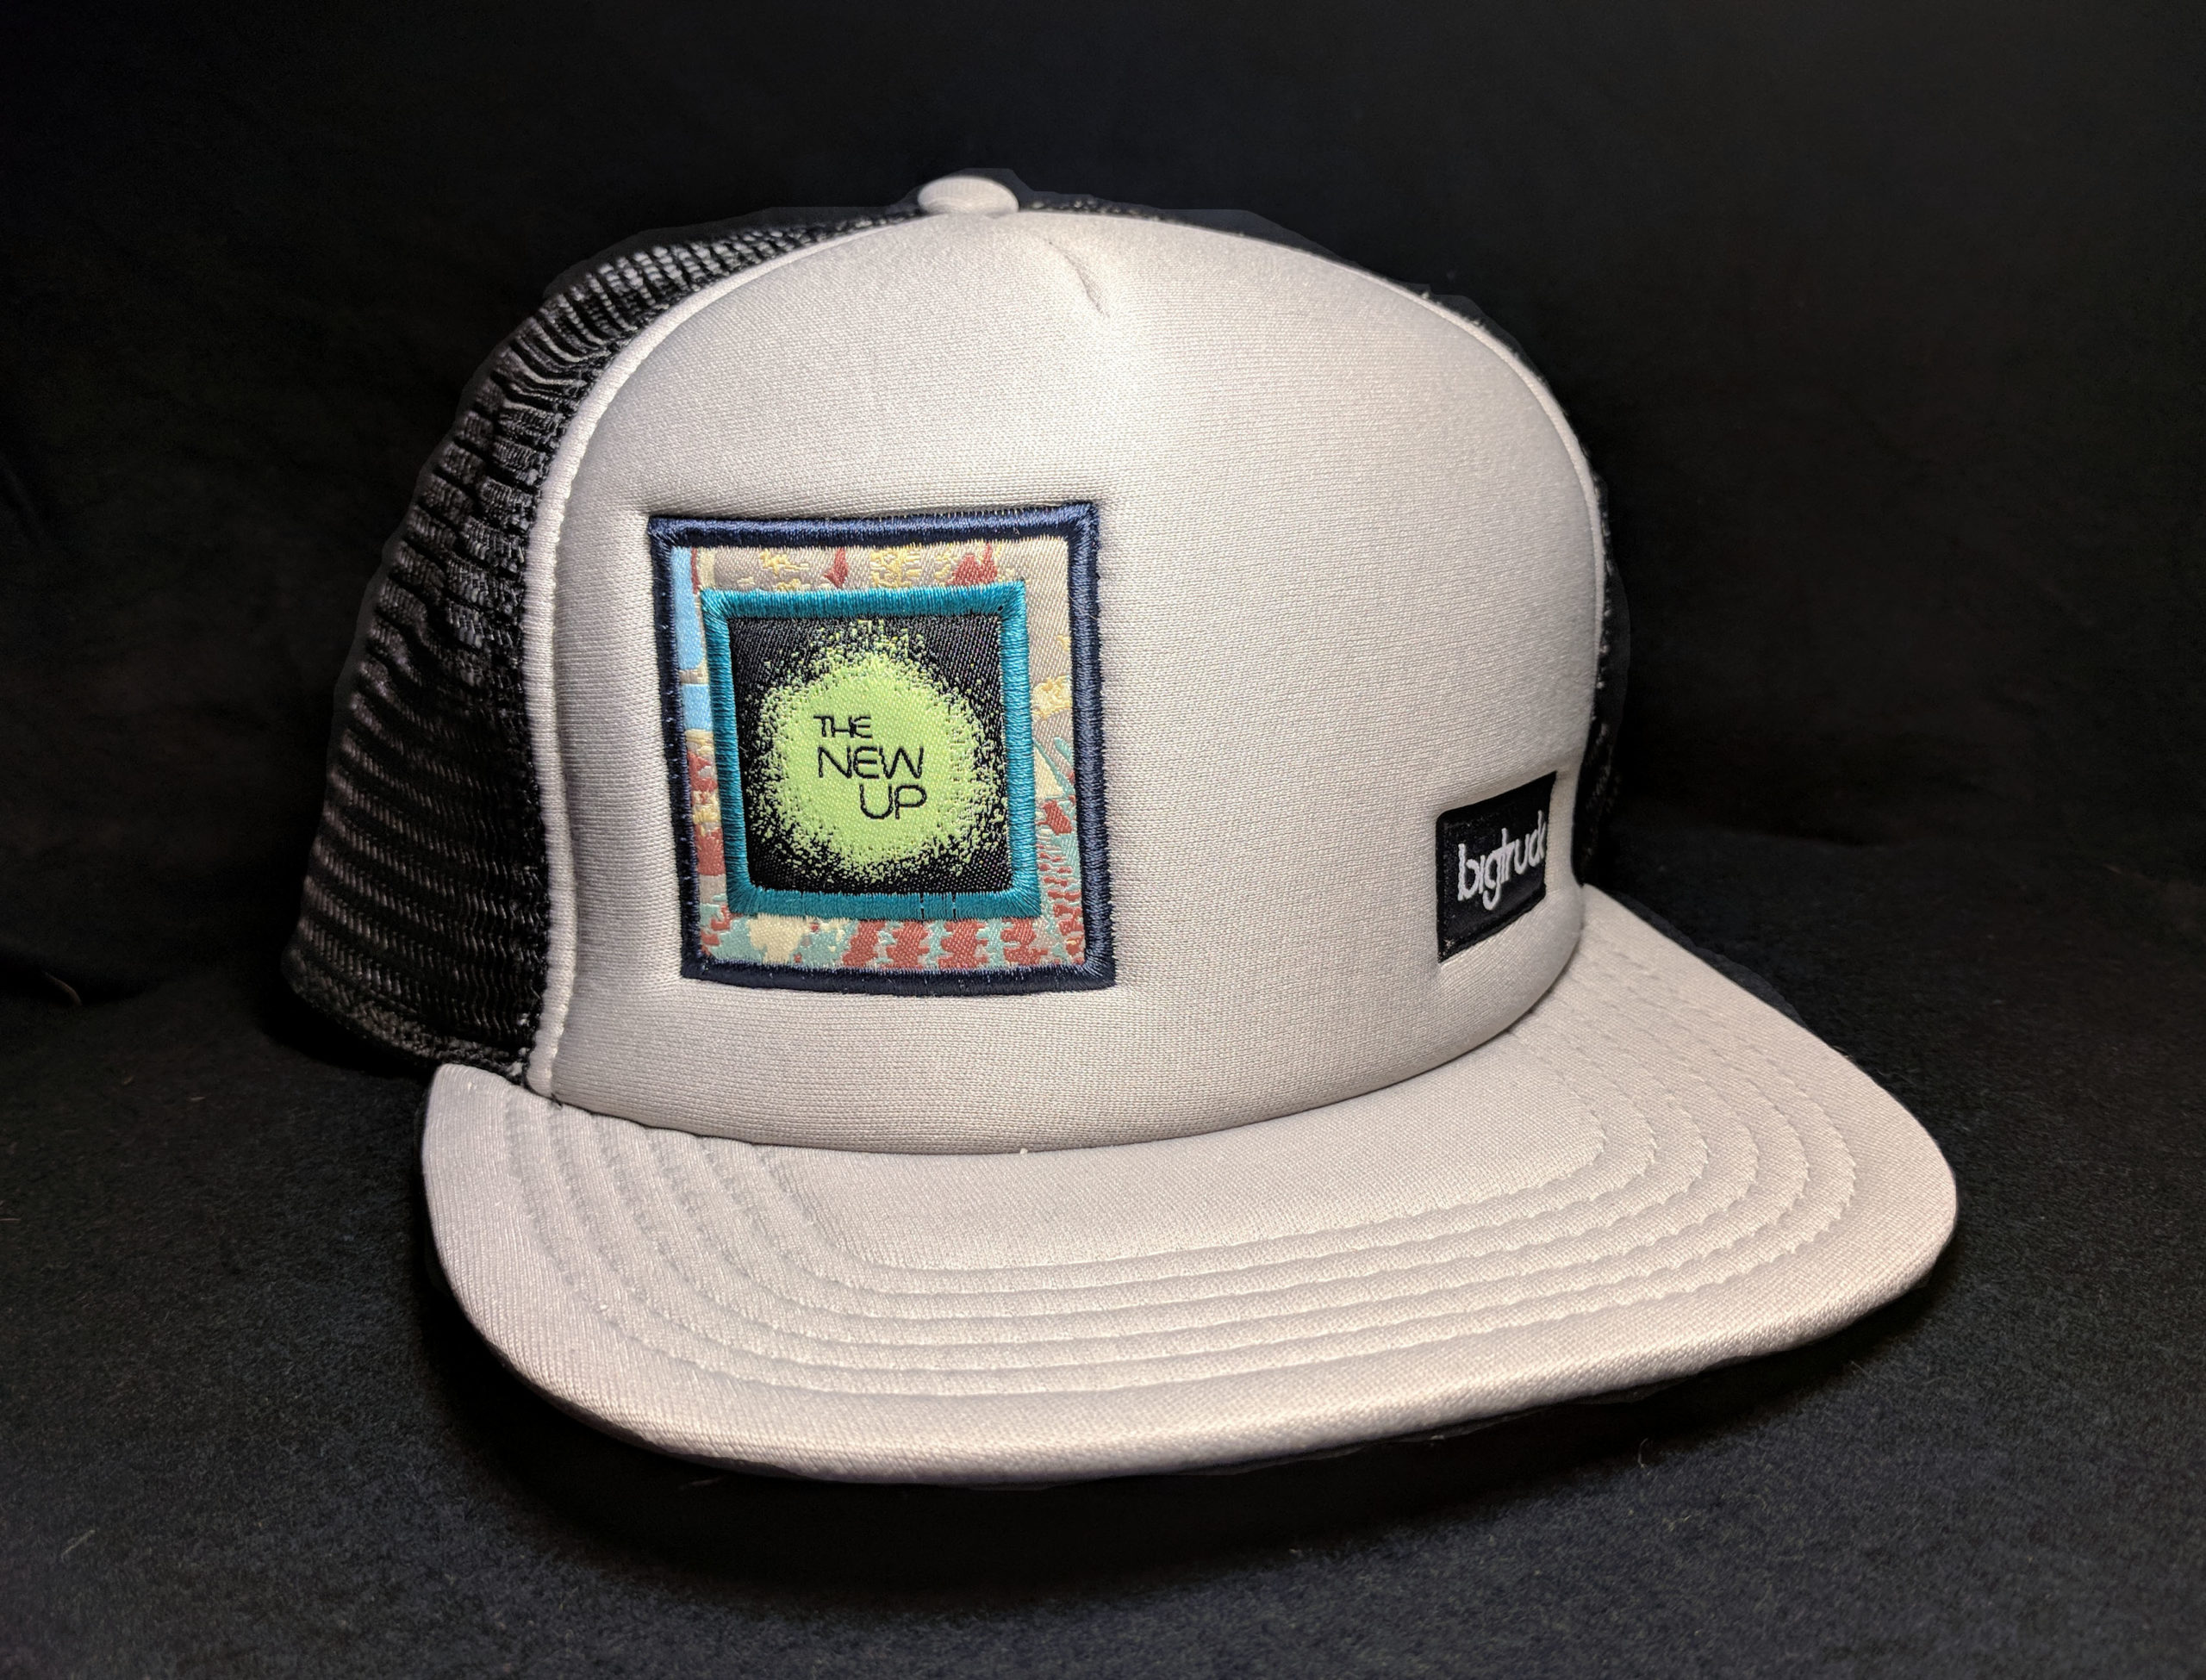 The New Up Trucker Hats